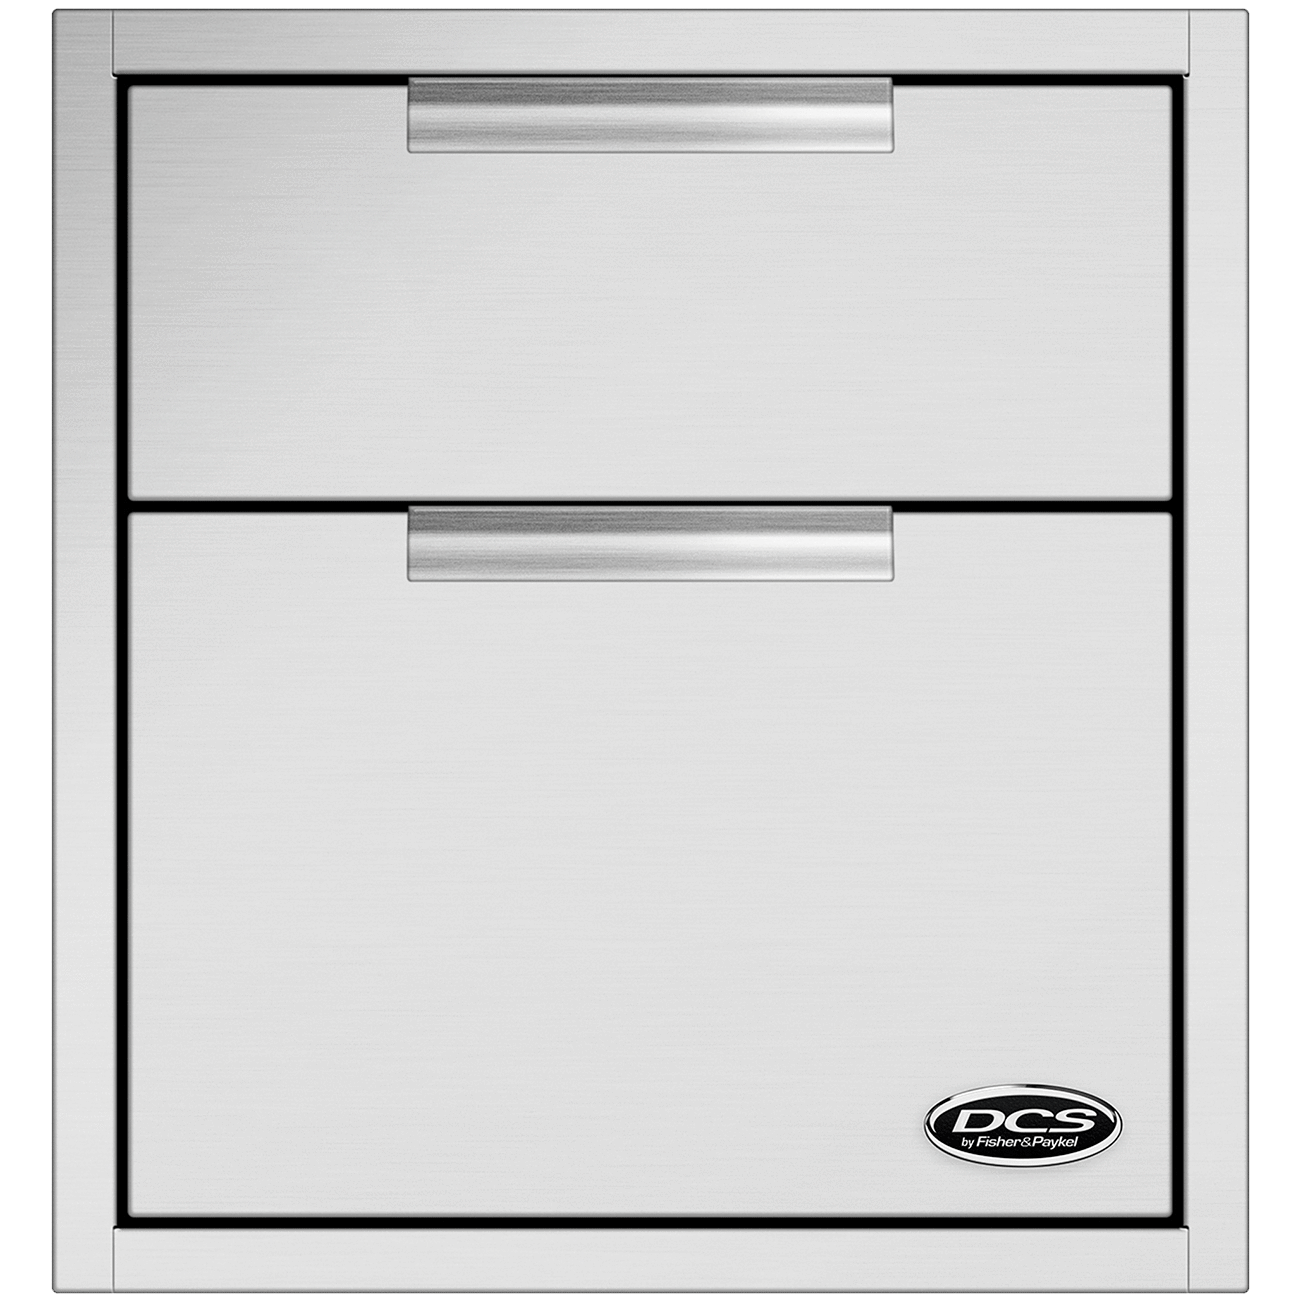 DCS 20-Inch Double Tower Drawer-TheBBQHQ